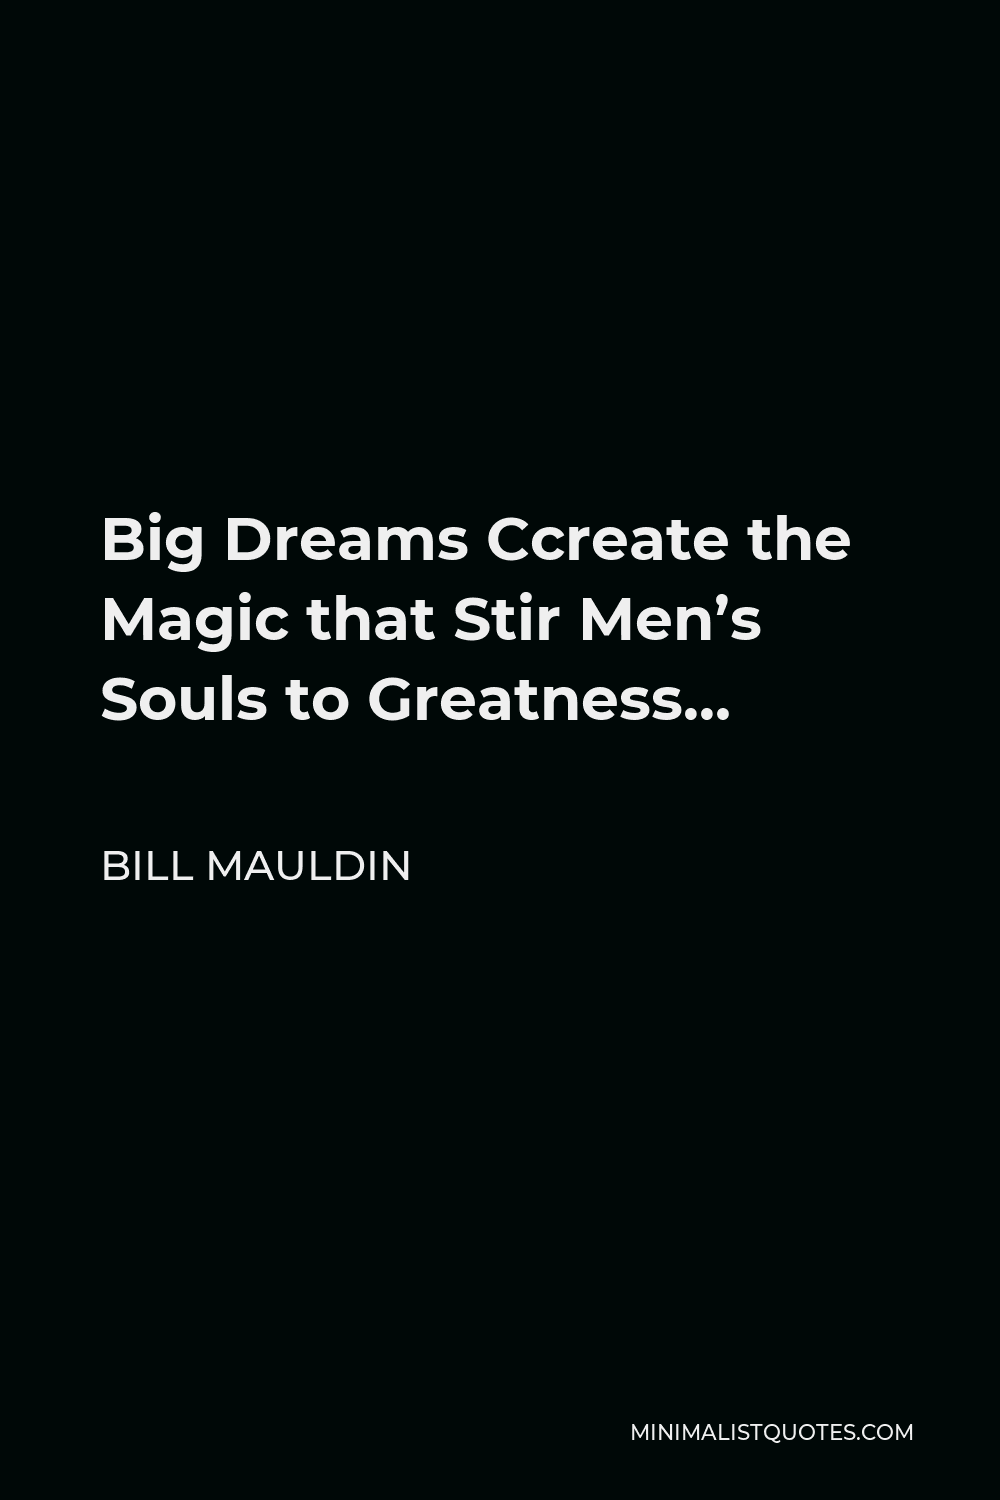 Bill Mauldin Quote - Big Dreams Ccreate the Magic that Stir Men’s Souls to Greatness…